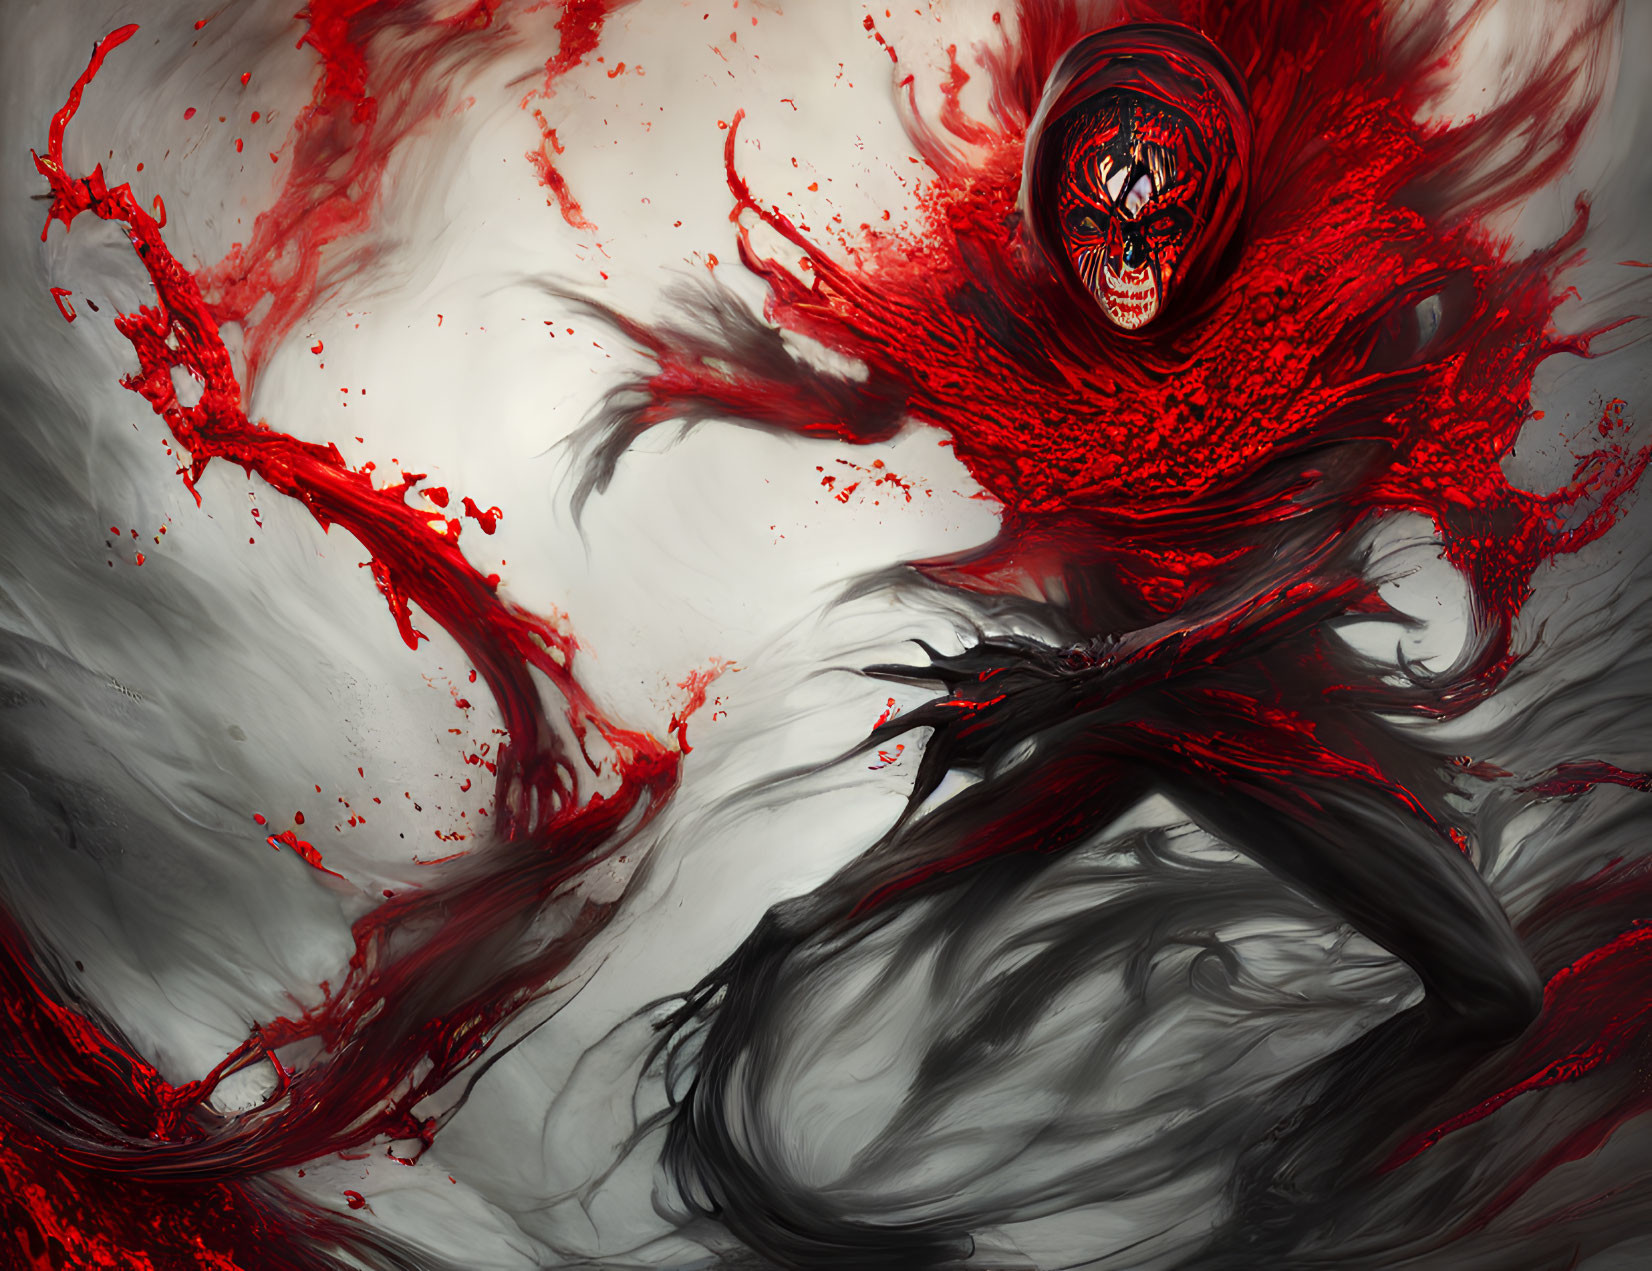 Sinister figure in red and black cloak with skull-like face and outstretched hands